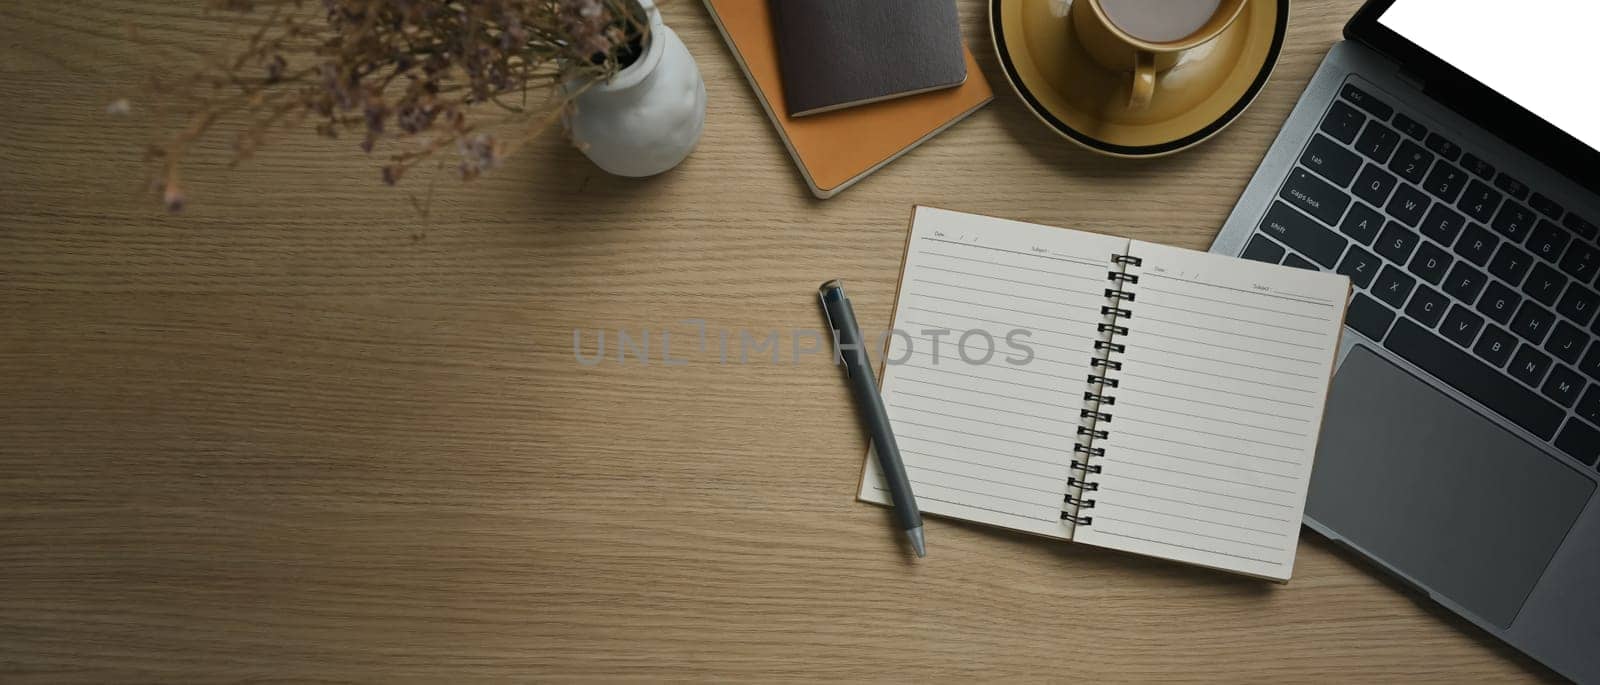 Top view of open notebook, laptop, cup of coffee and notepad on wooden working desk by prathanchorruangsak